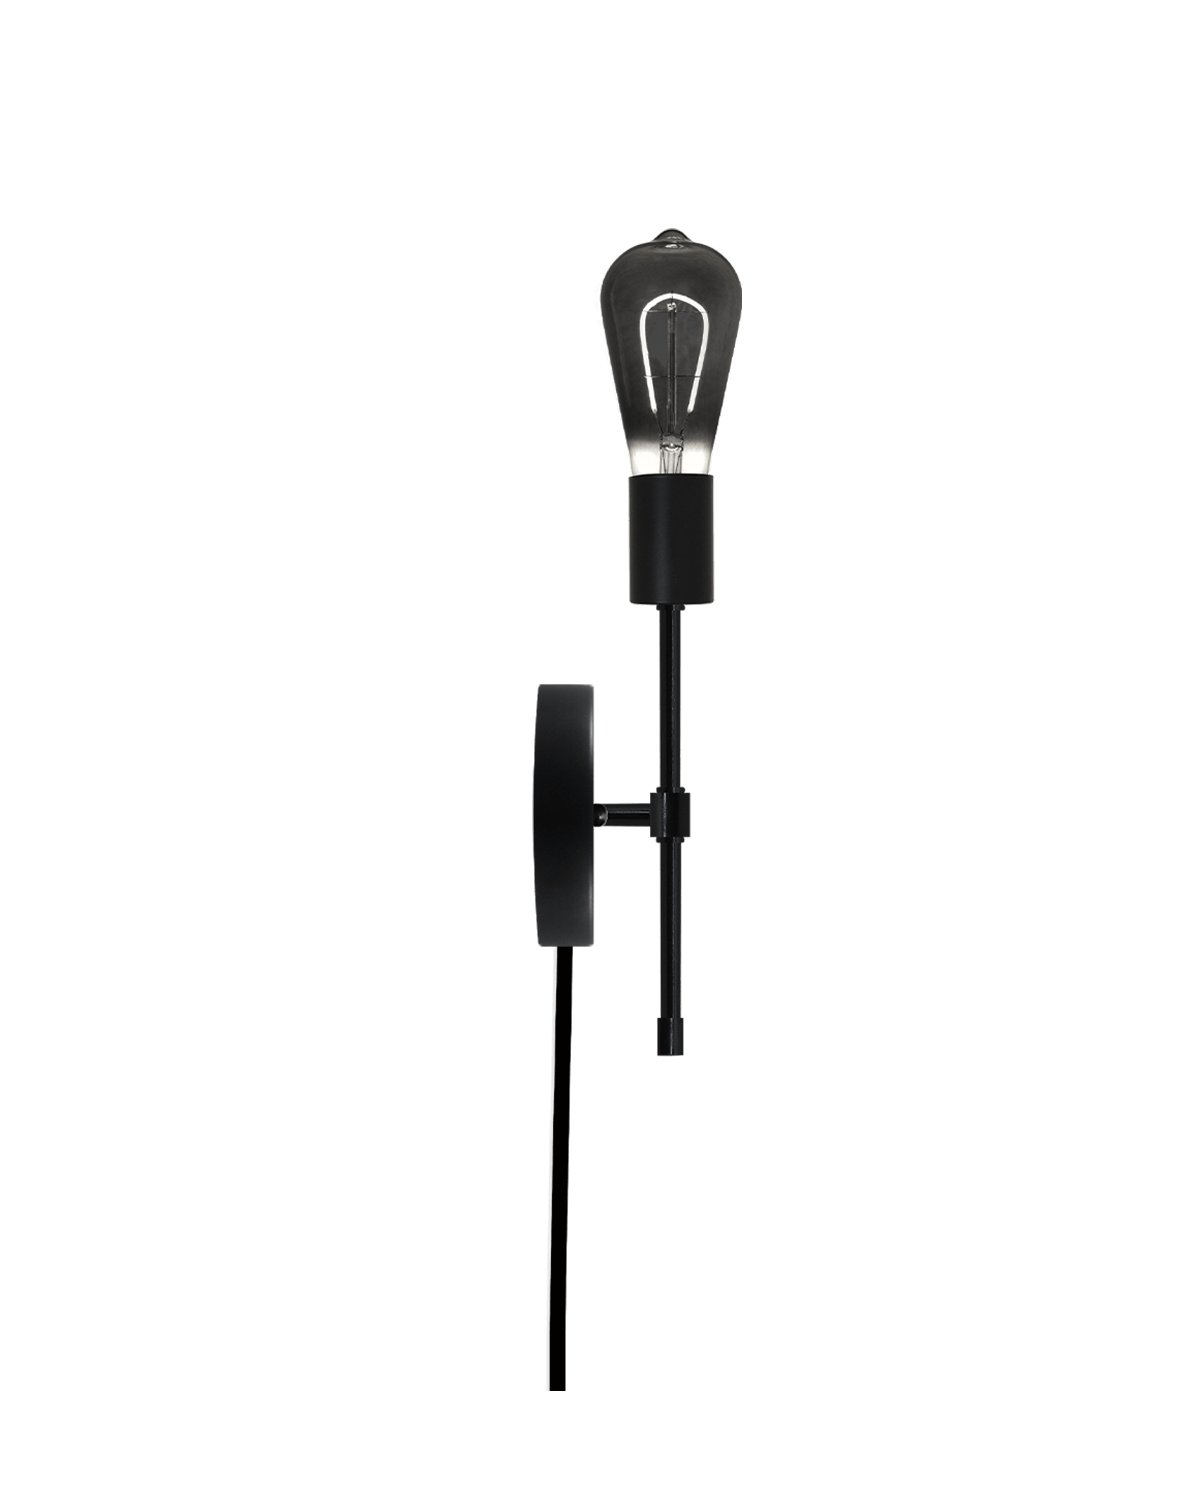 Plug-In Torch Wall Sconce: Black with Smoke